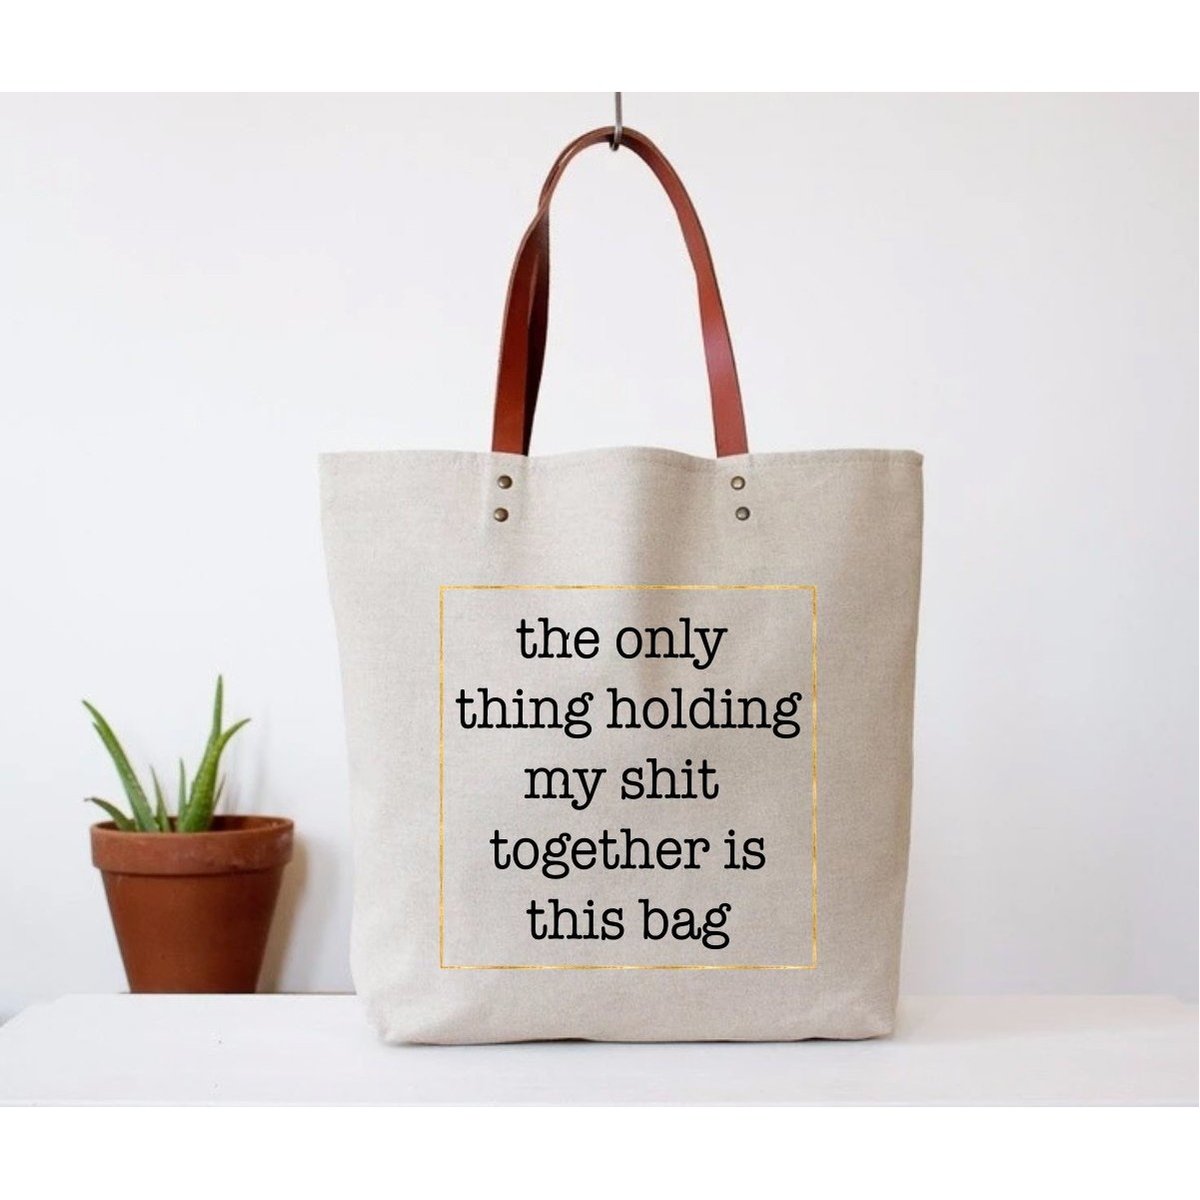 Canvas tote bag with faux leather straps that says "the only thing holding my shit together is this bag"